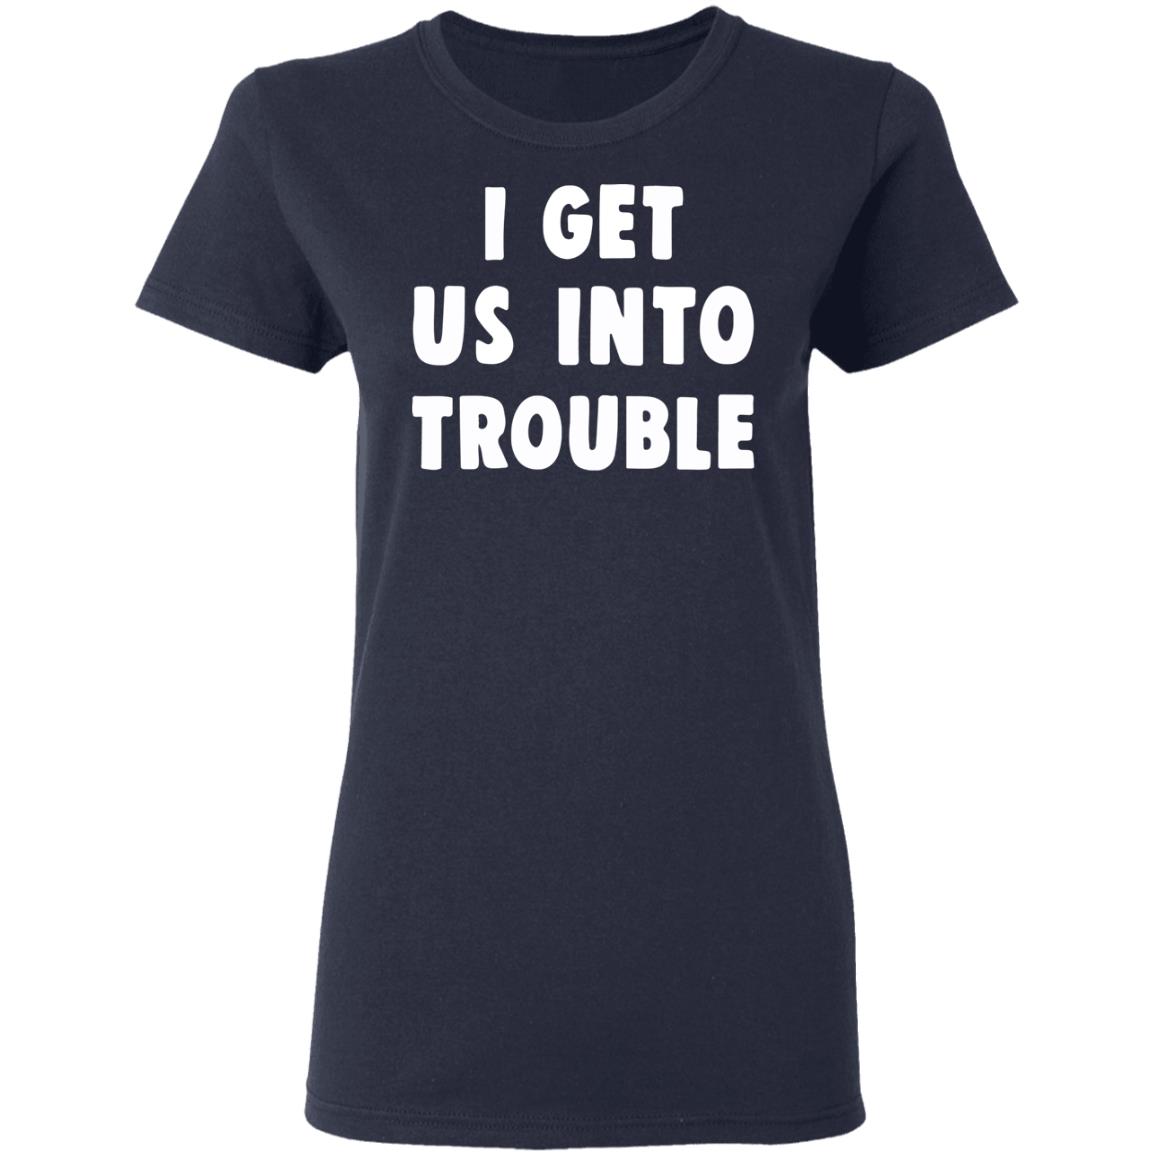 I get us into trouble shirt - Rockatee